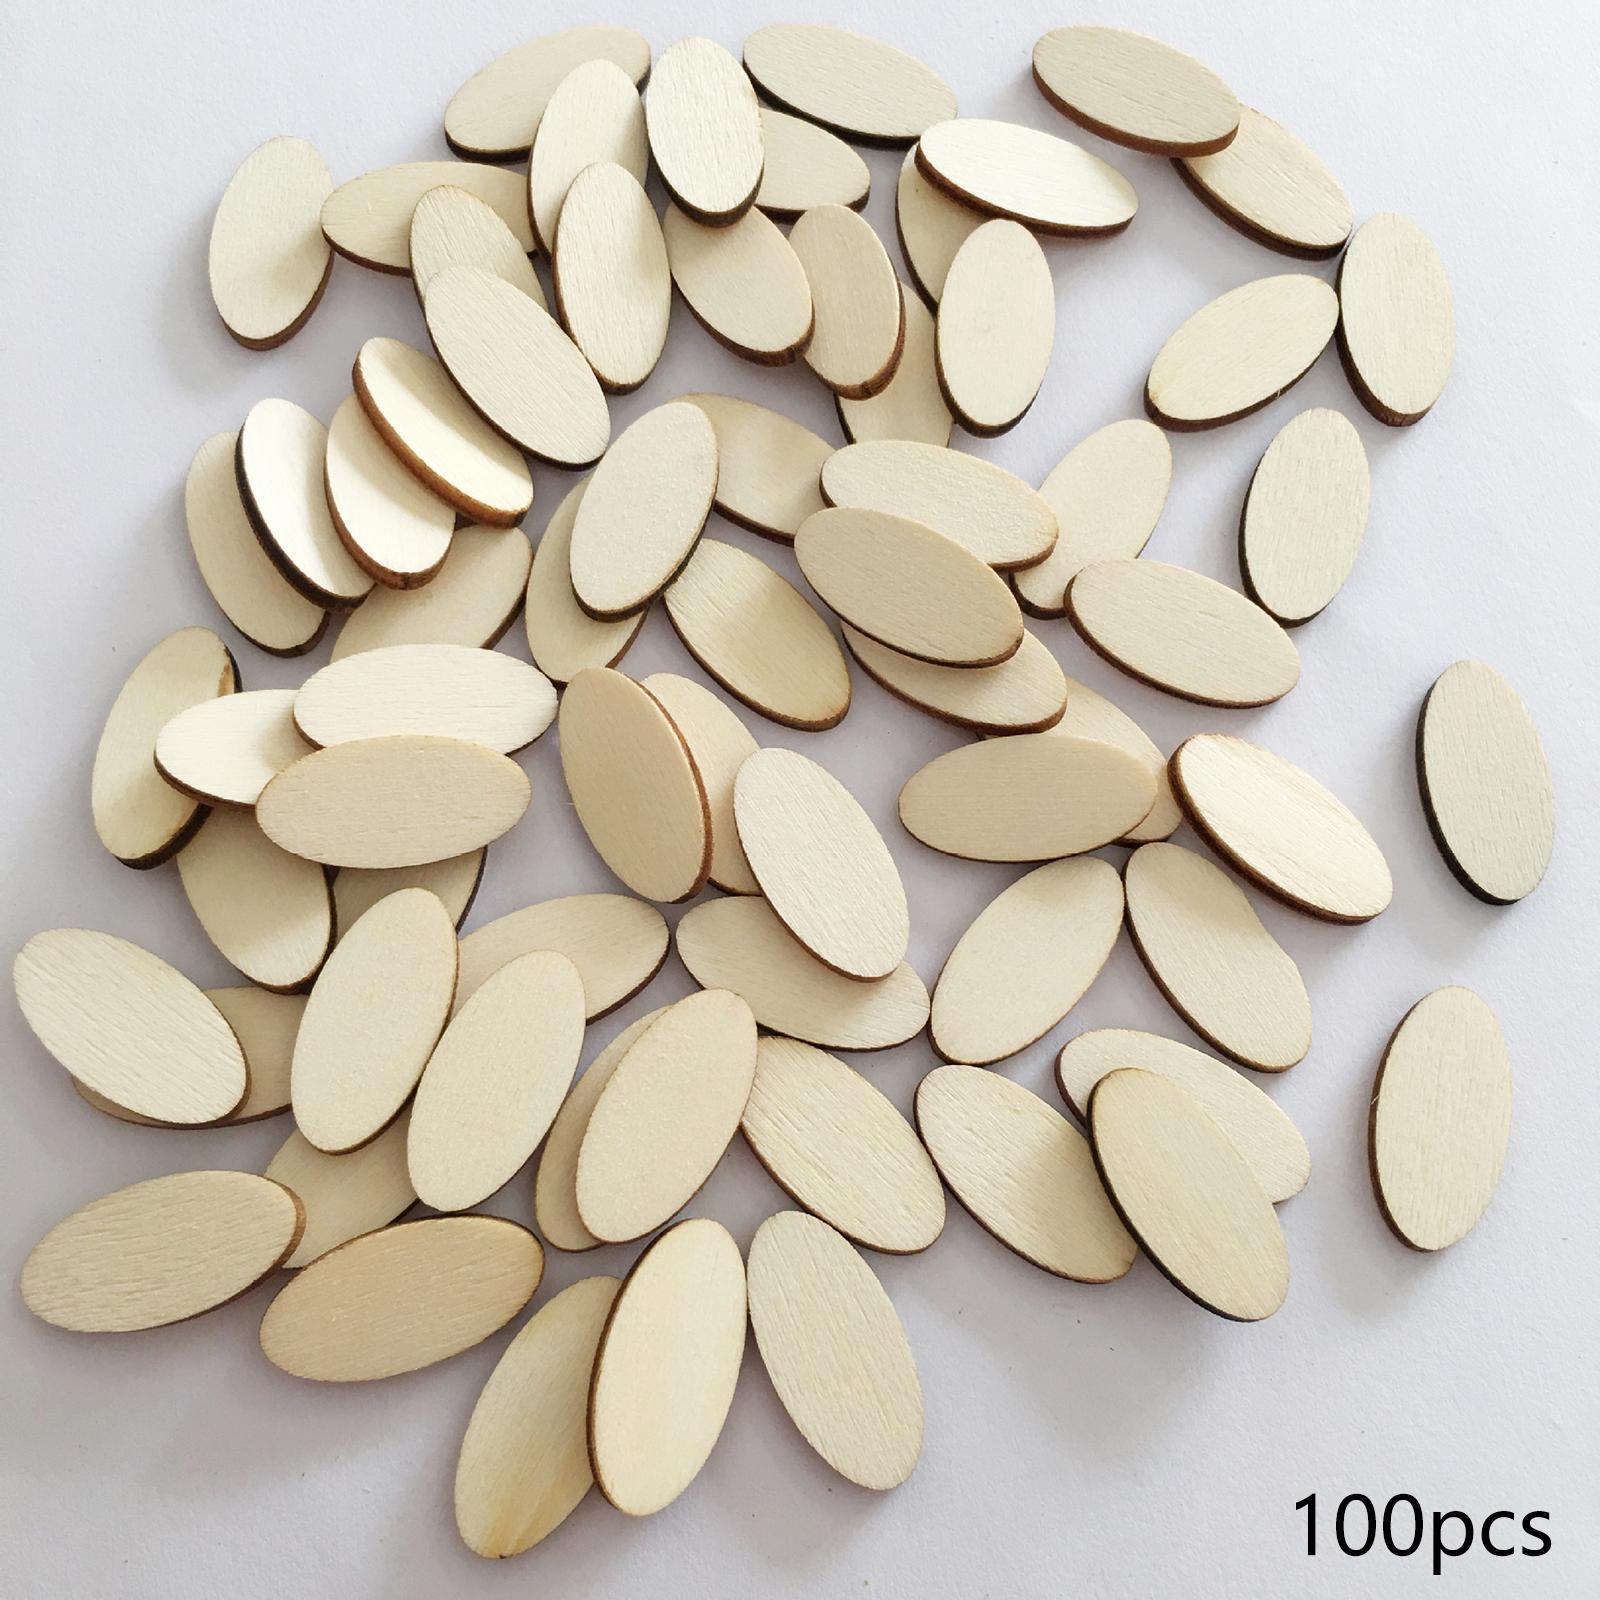 100 Pieces Rustic Oval Shapes Wooden Craft Decorations Wood Plaques Gift Tag Decor Supplies Arts Blank for Painting Home Crafts Projects DIY